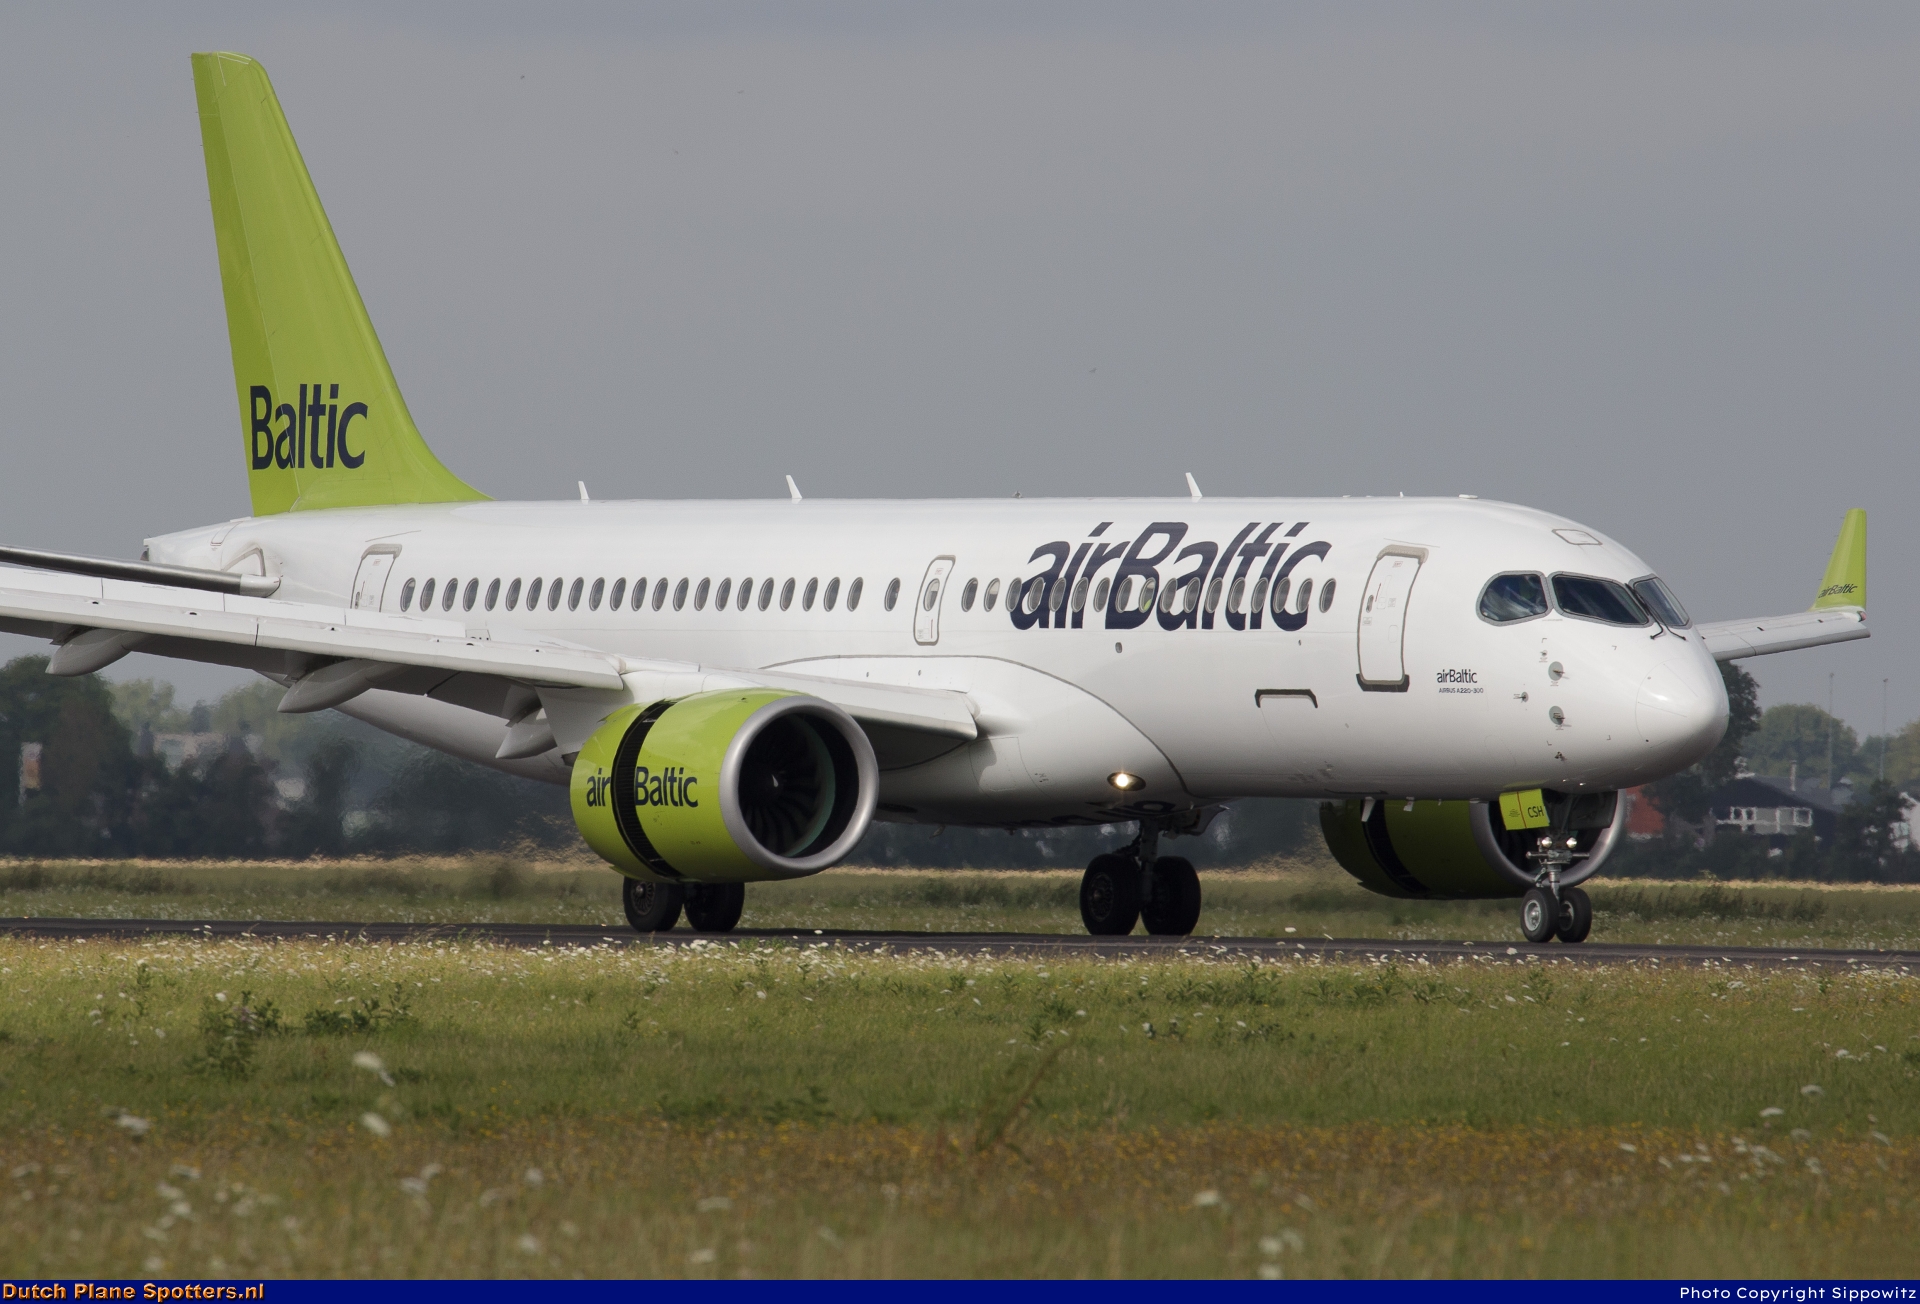 YL-CSH Airbus A220-300 Air Baltic by Sippowitz